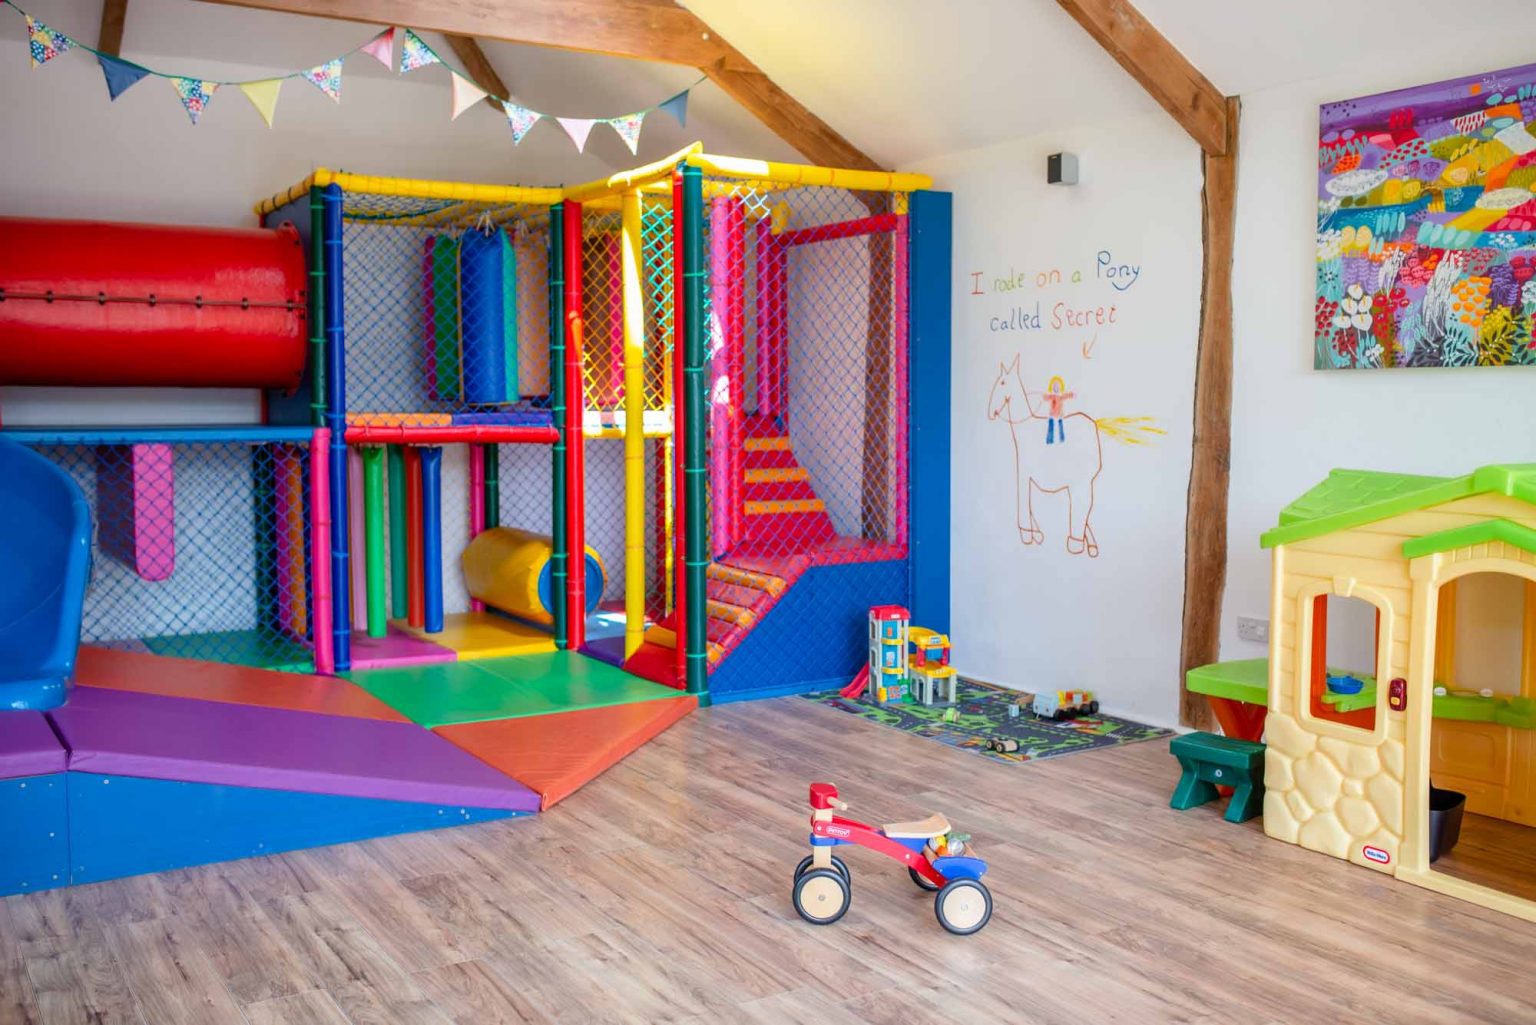 A rainbow indoor playbarn for young children located at Bosinver in Cornwall